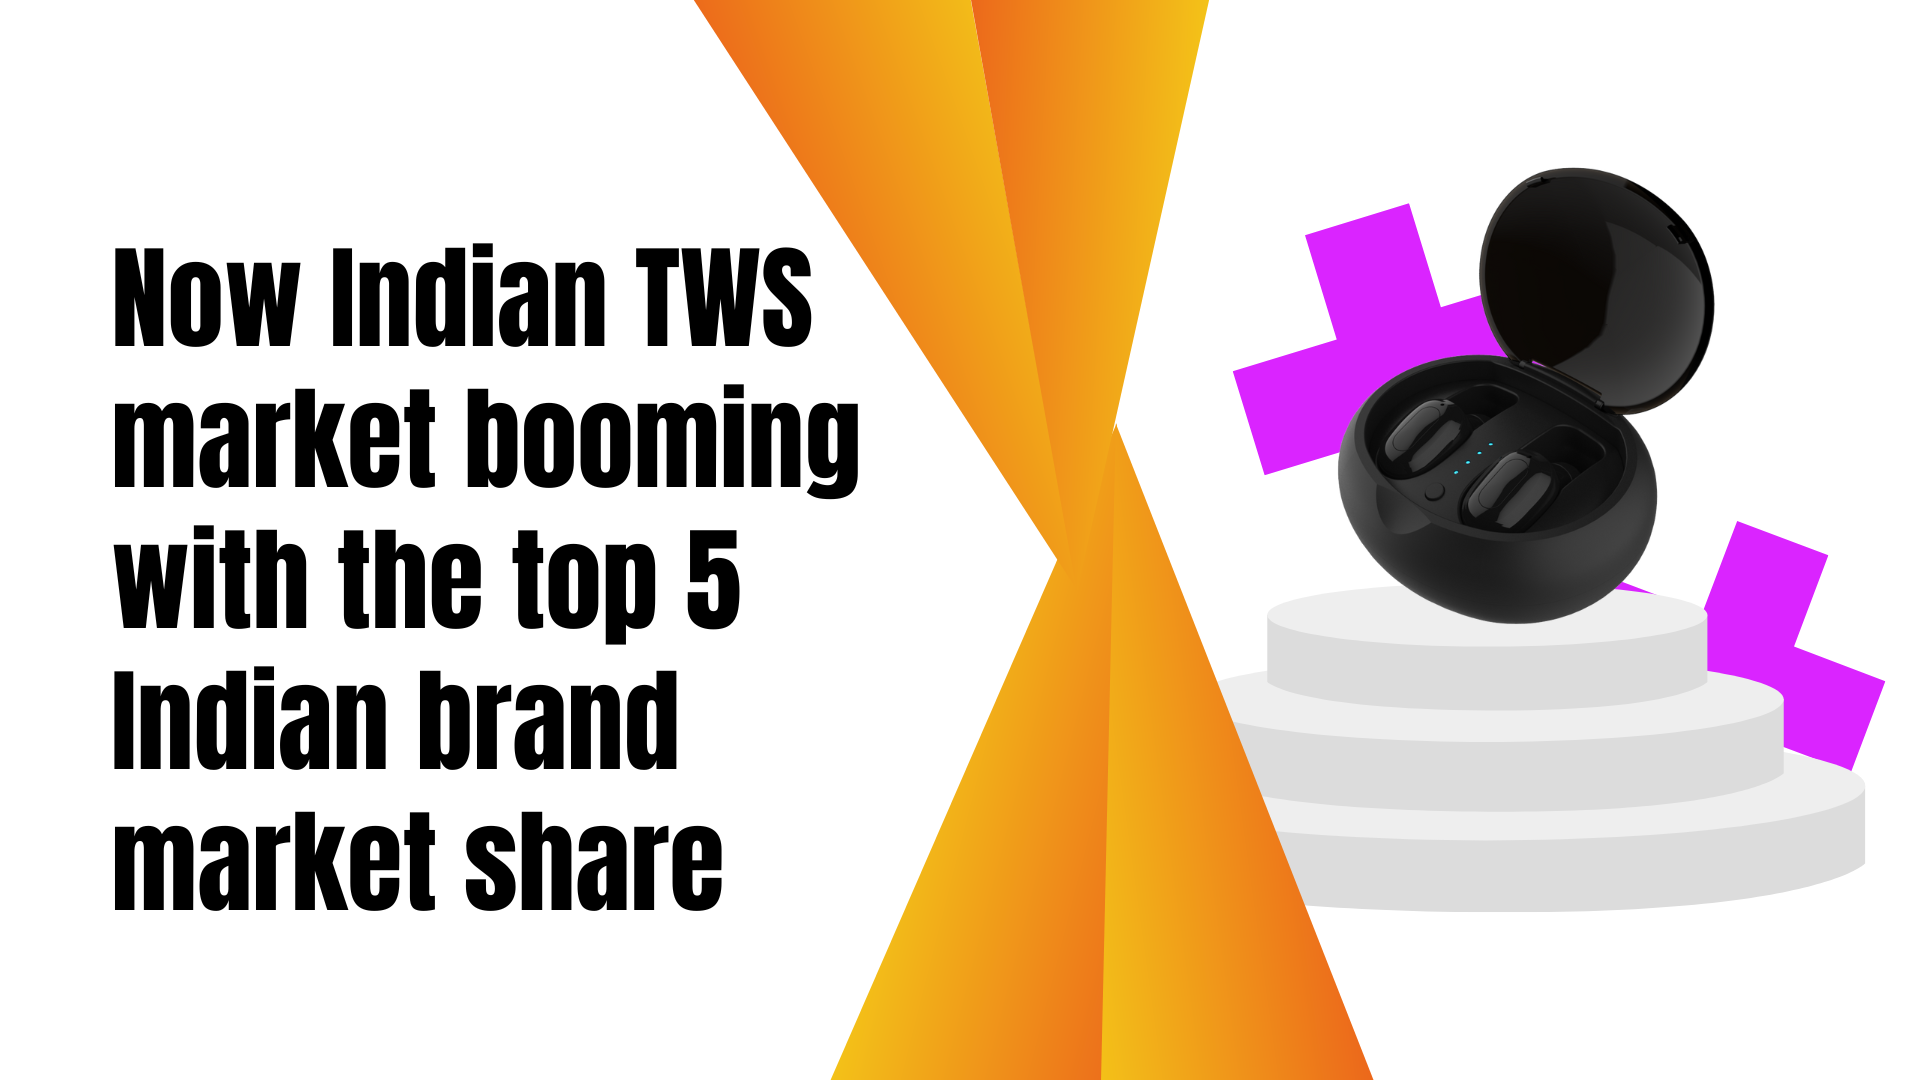 Now Indian TWS market booming with the top 5 Indian brand market share